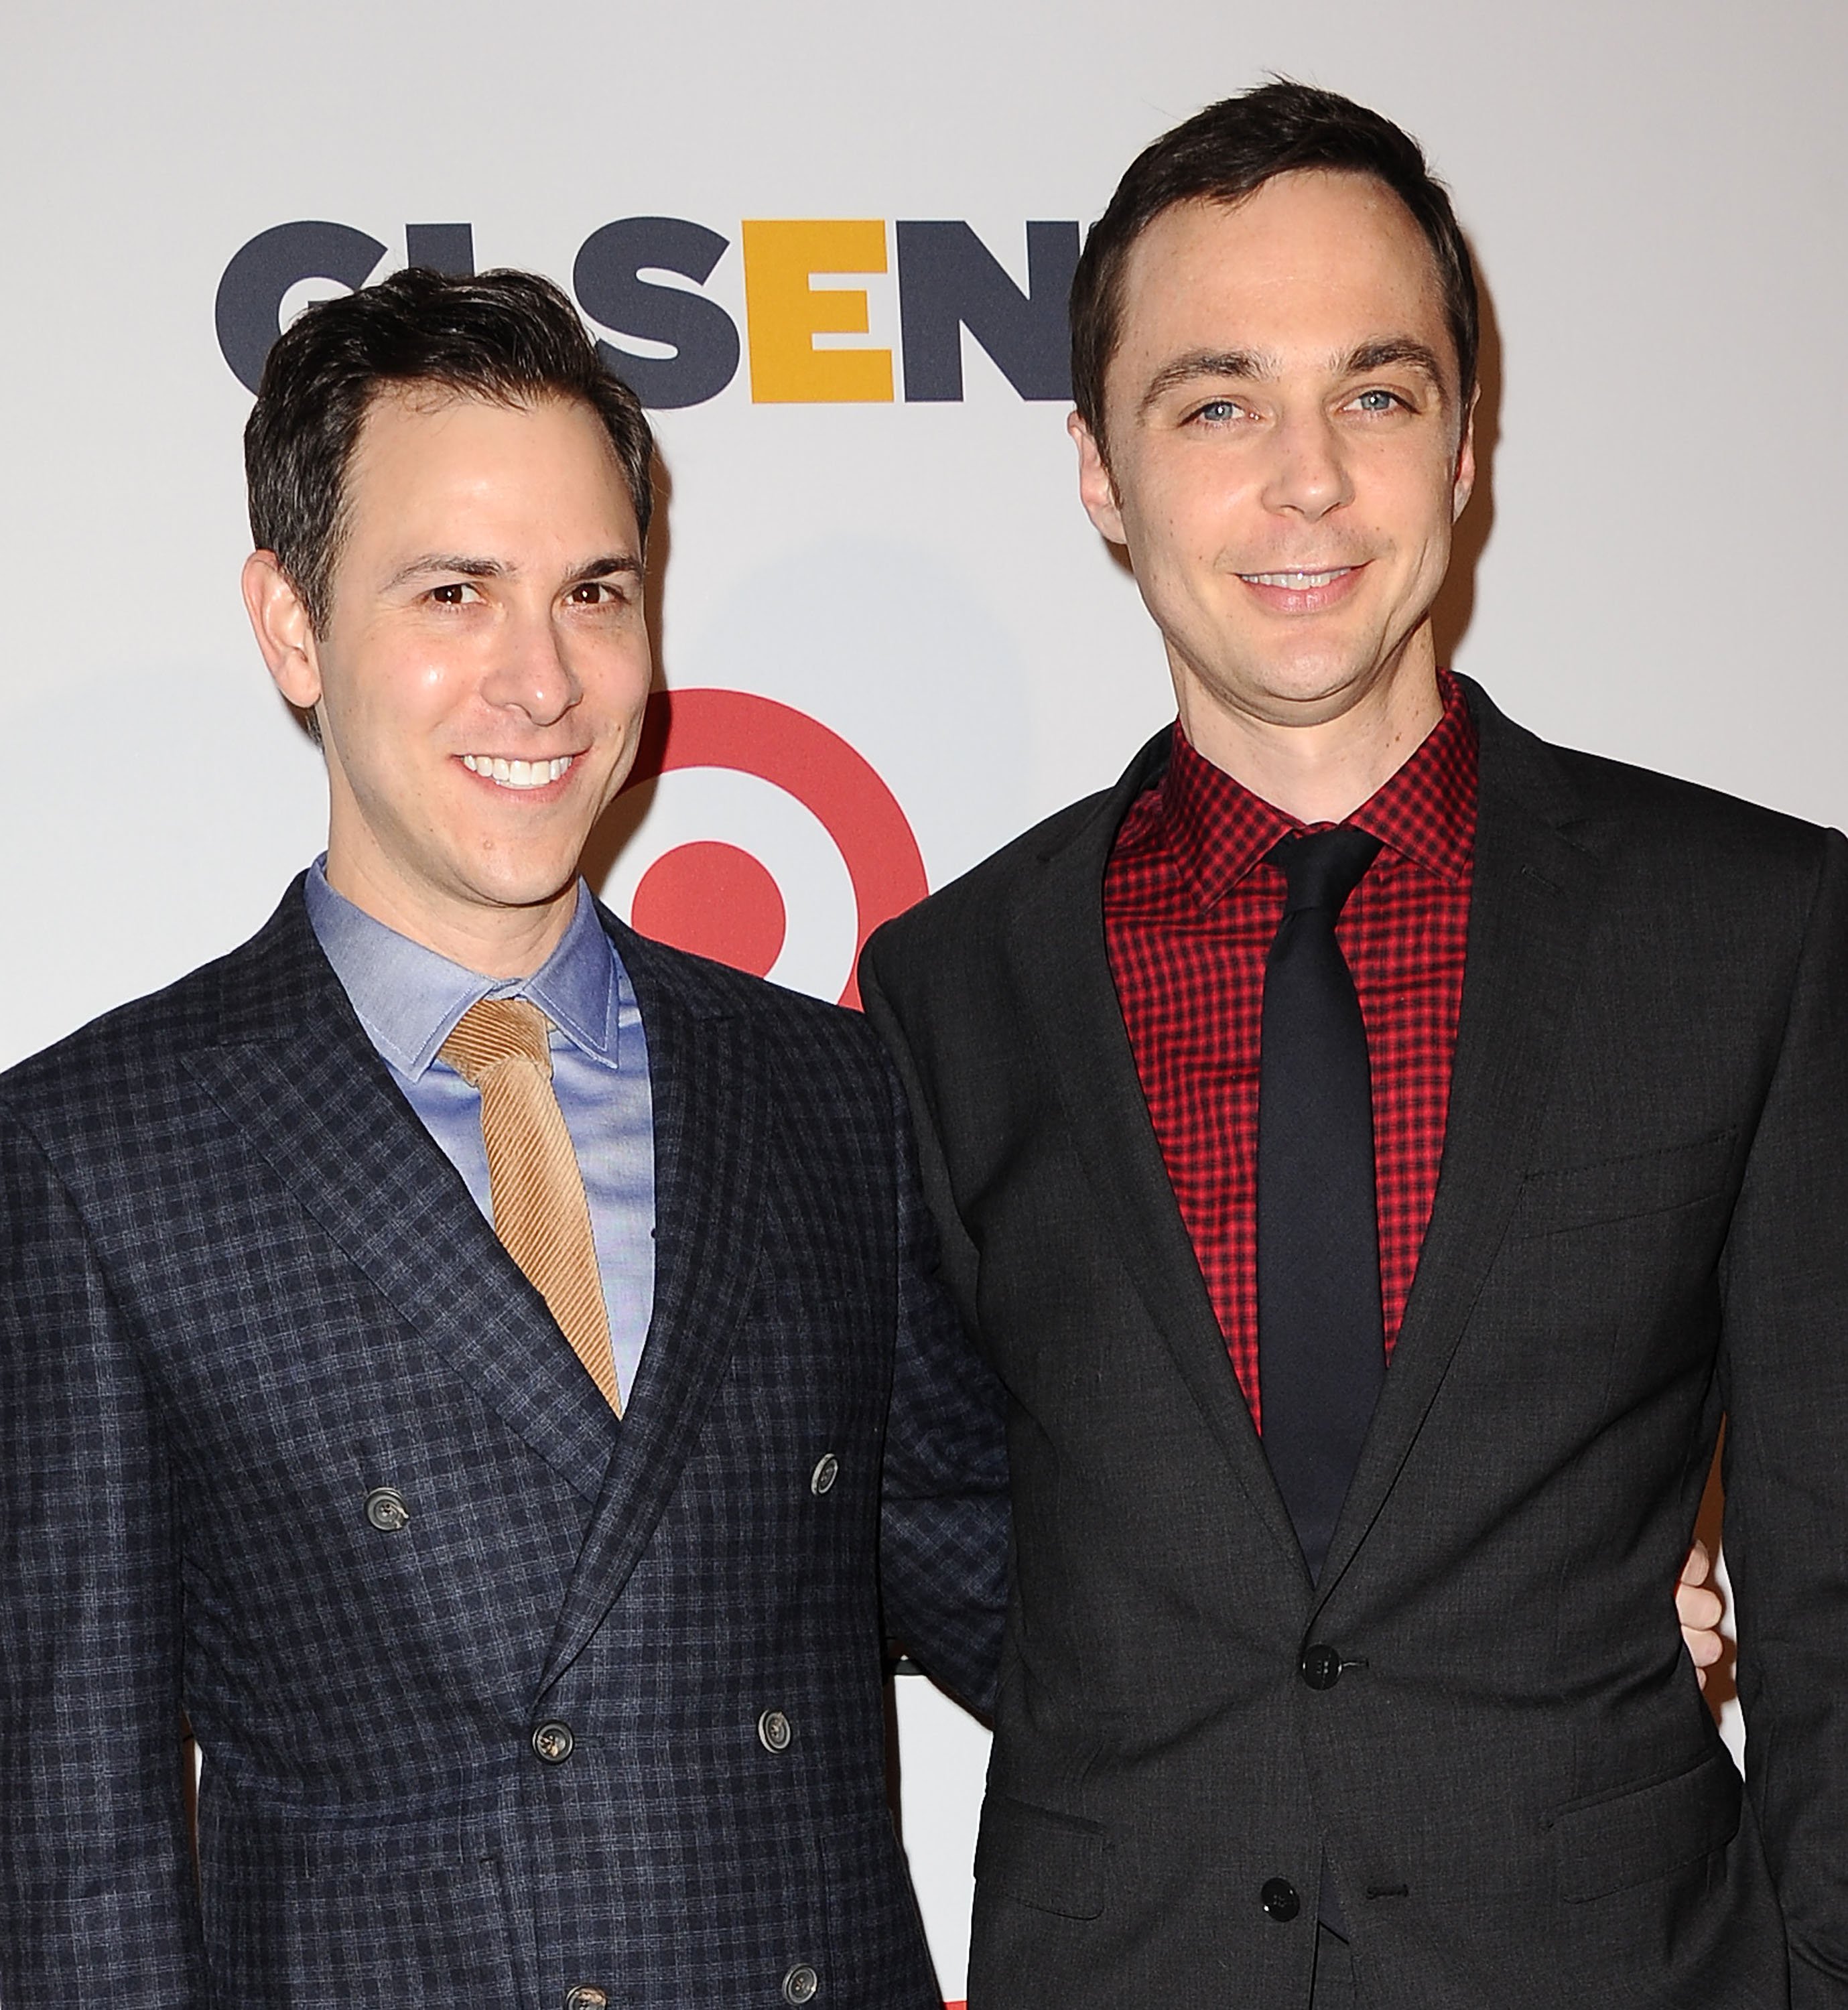 Actor Jim Parsons and Todd Spiewak attend the 9th annual GLSEN Respect Awards at Beverly Hills Hotel on October 18, 2013 in Beverly Hills, California. | Source: Getty Images